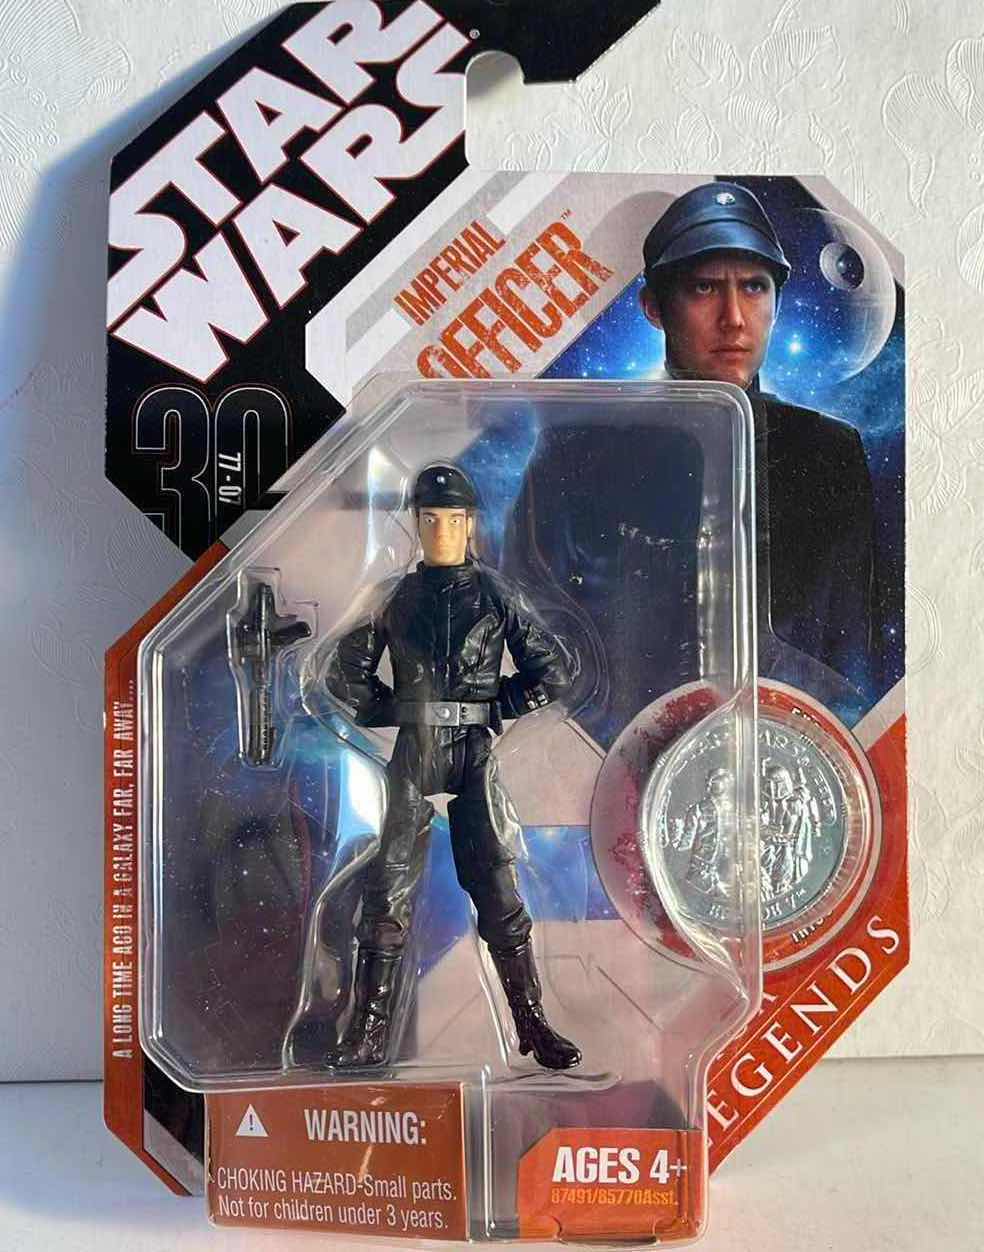 Photo 1 of NIB STAR WARS SAGA LEGENDS 30TH ANNIVERSARY “IMPERIAL OFFICER” FIGURE W/ SILVER COIN - RETAIL PRICE $22.99